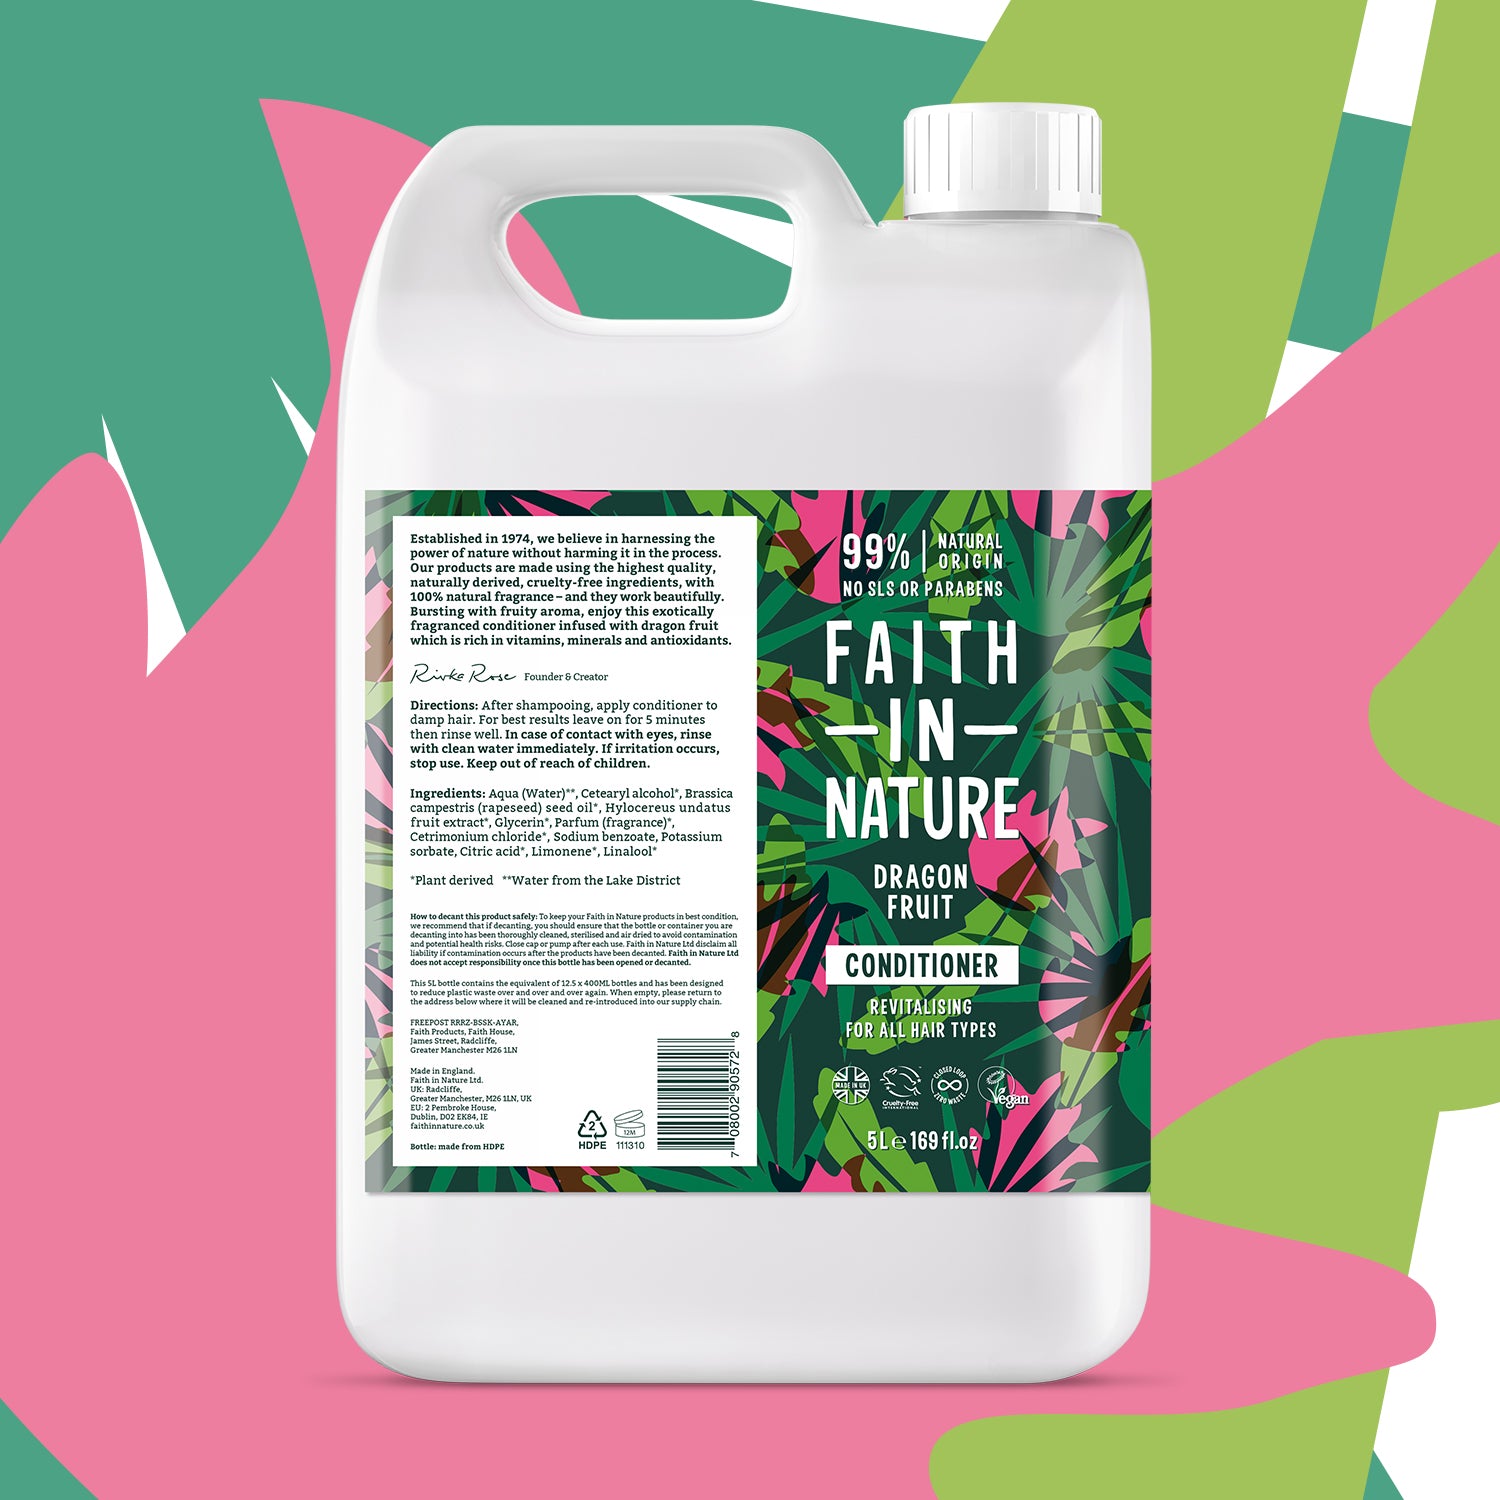 Faith in Nature - Dragon Fruit Conditioner 5ltr